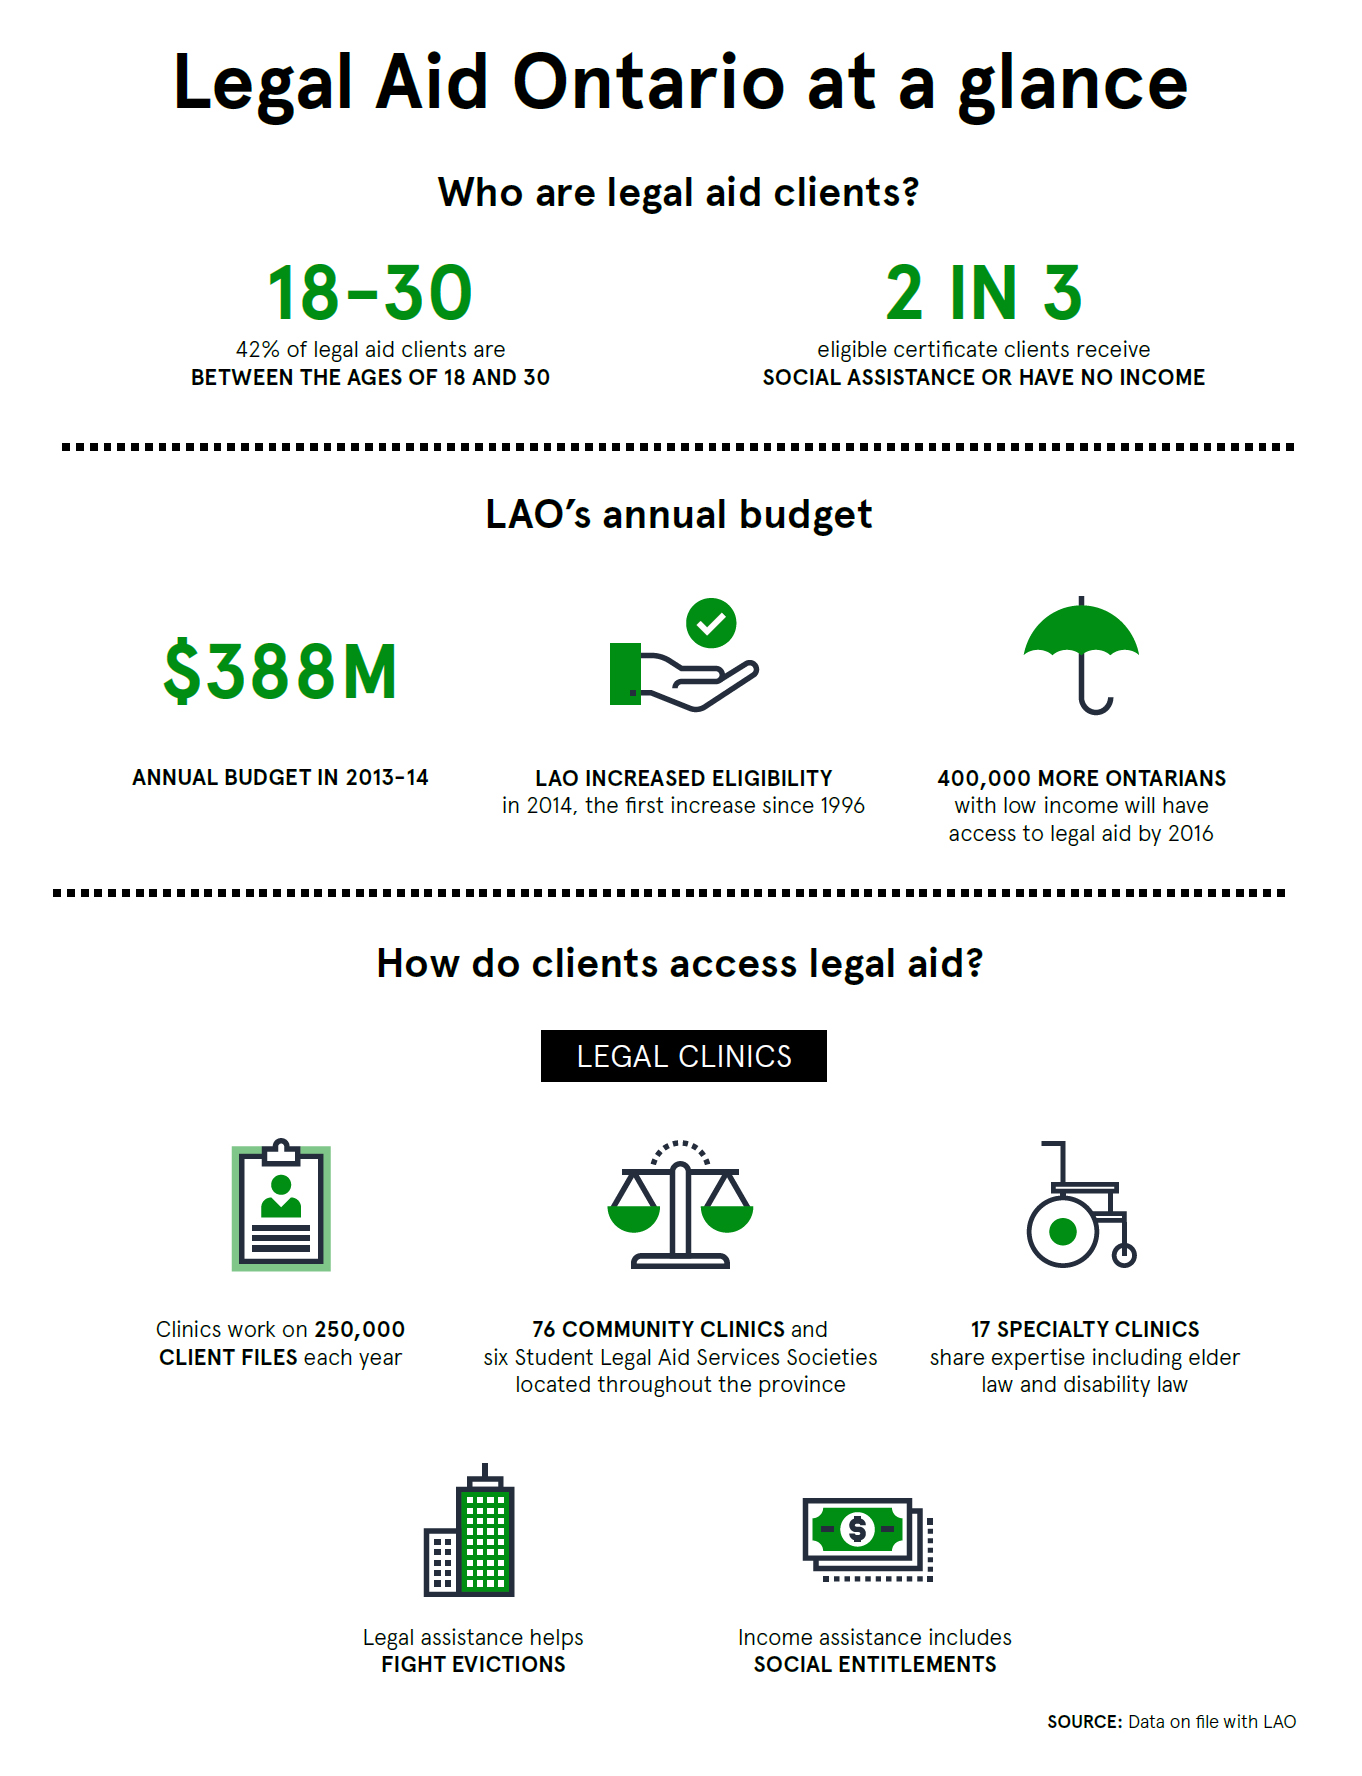 A 2-part infographic titled Legal Aid Ontario at a glance that provides an overview of who legal aid clients are, Legal Aid Ontario's annual budget, and how clients access legal aid. This is part 1. 
				42% of legal aid clients are between the ages of 18 and 30, and 2 in 3 eligible certificate clients receive social assistance or have no income. 
				Legal Aid Ontario had an annual budget of $388 million in the fiscal year 2013/2014, and Legal Aid Ontario increased eligibility in 2014. The 2014 increase was the first increase since 1996. As a result, 400,000 more Ontarians with low-income will have access to legal aid by 2016. 
				There are many ways clients access legal aid. One way is through legal clinics. Legal clinics work on 250, 000 client files each year. There are 76 community clinics and six Student Legal Aid Services Societies located throughout the province, including 17 specialty clinics that share expertise like elder law and disability law. 
				Legal assistance helps fight evictions, and income assistance includes social entitlements.